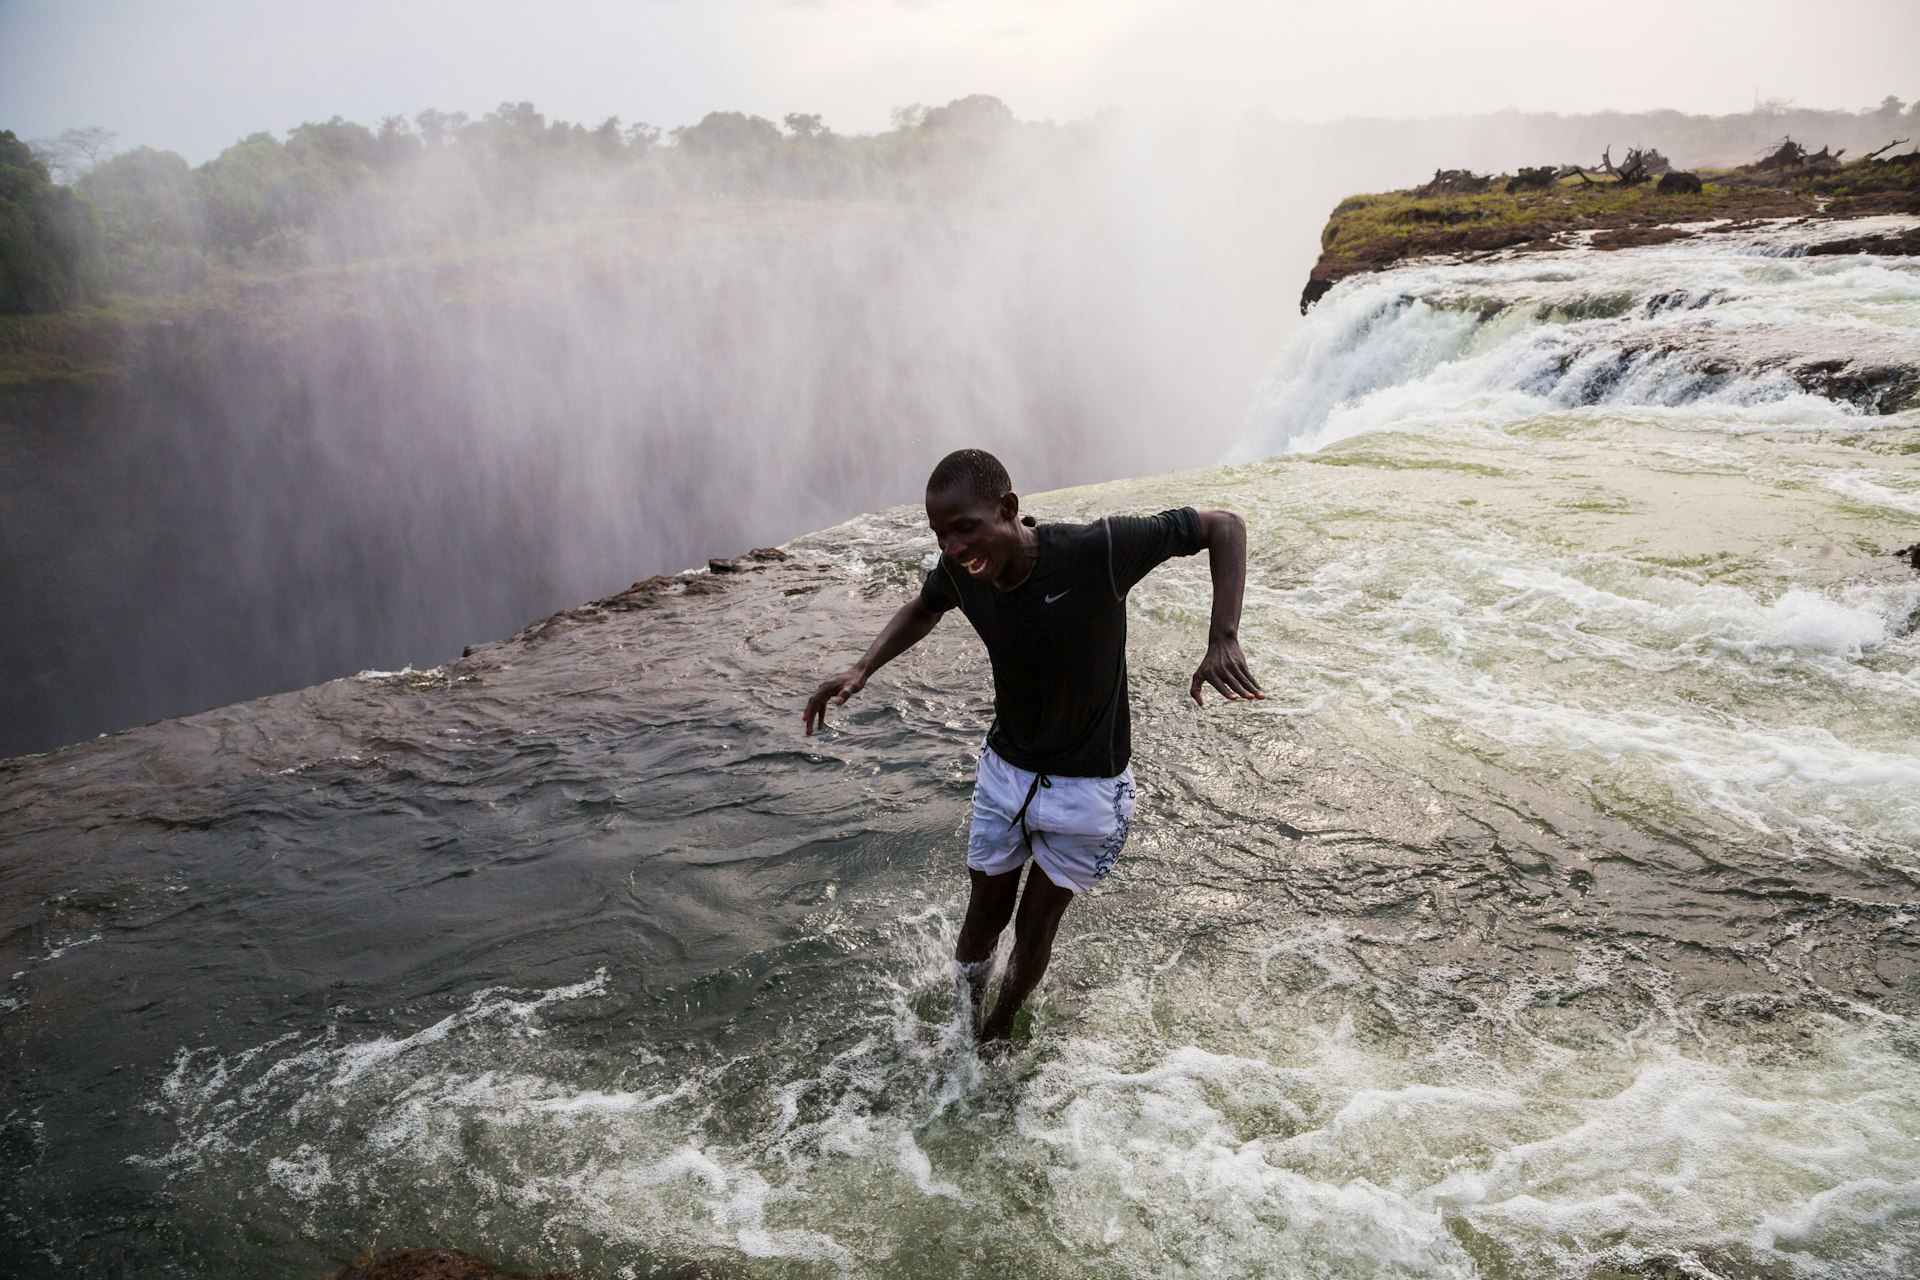 The naturally formed 'Devil's Pool' in Zambia